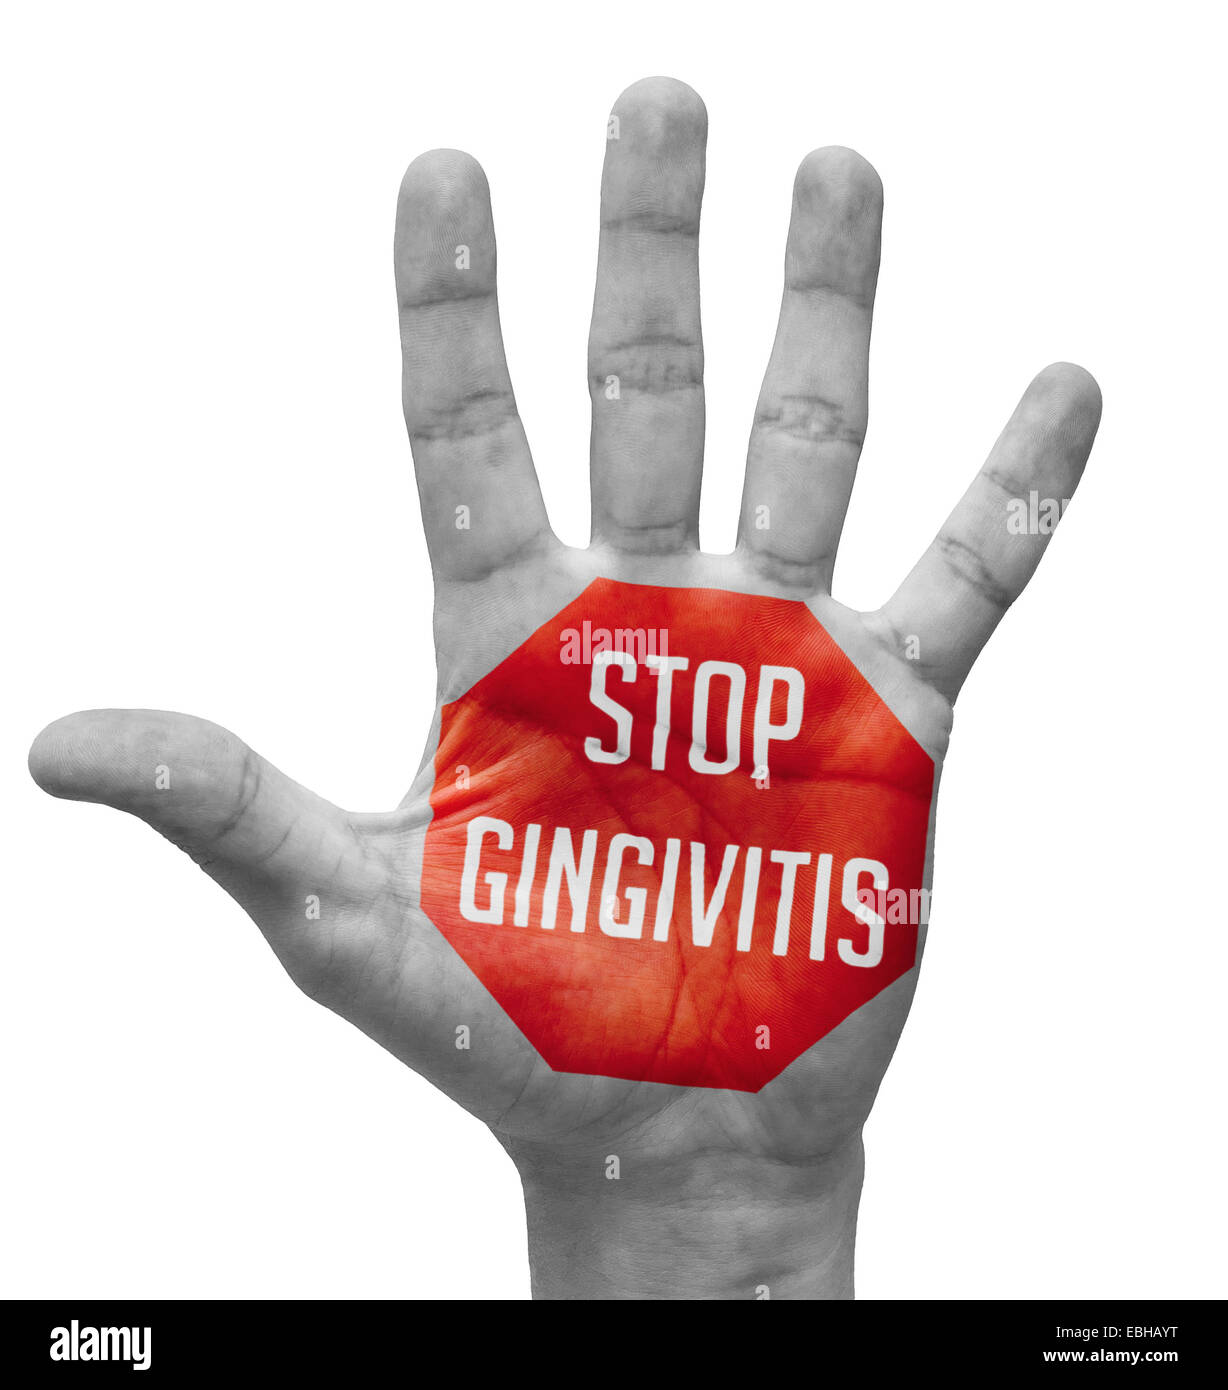 Stop Gingivitis Sign Painted, Open Hand Raised, Isolated on White Background. Stock Photo